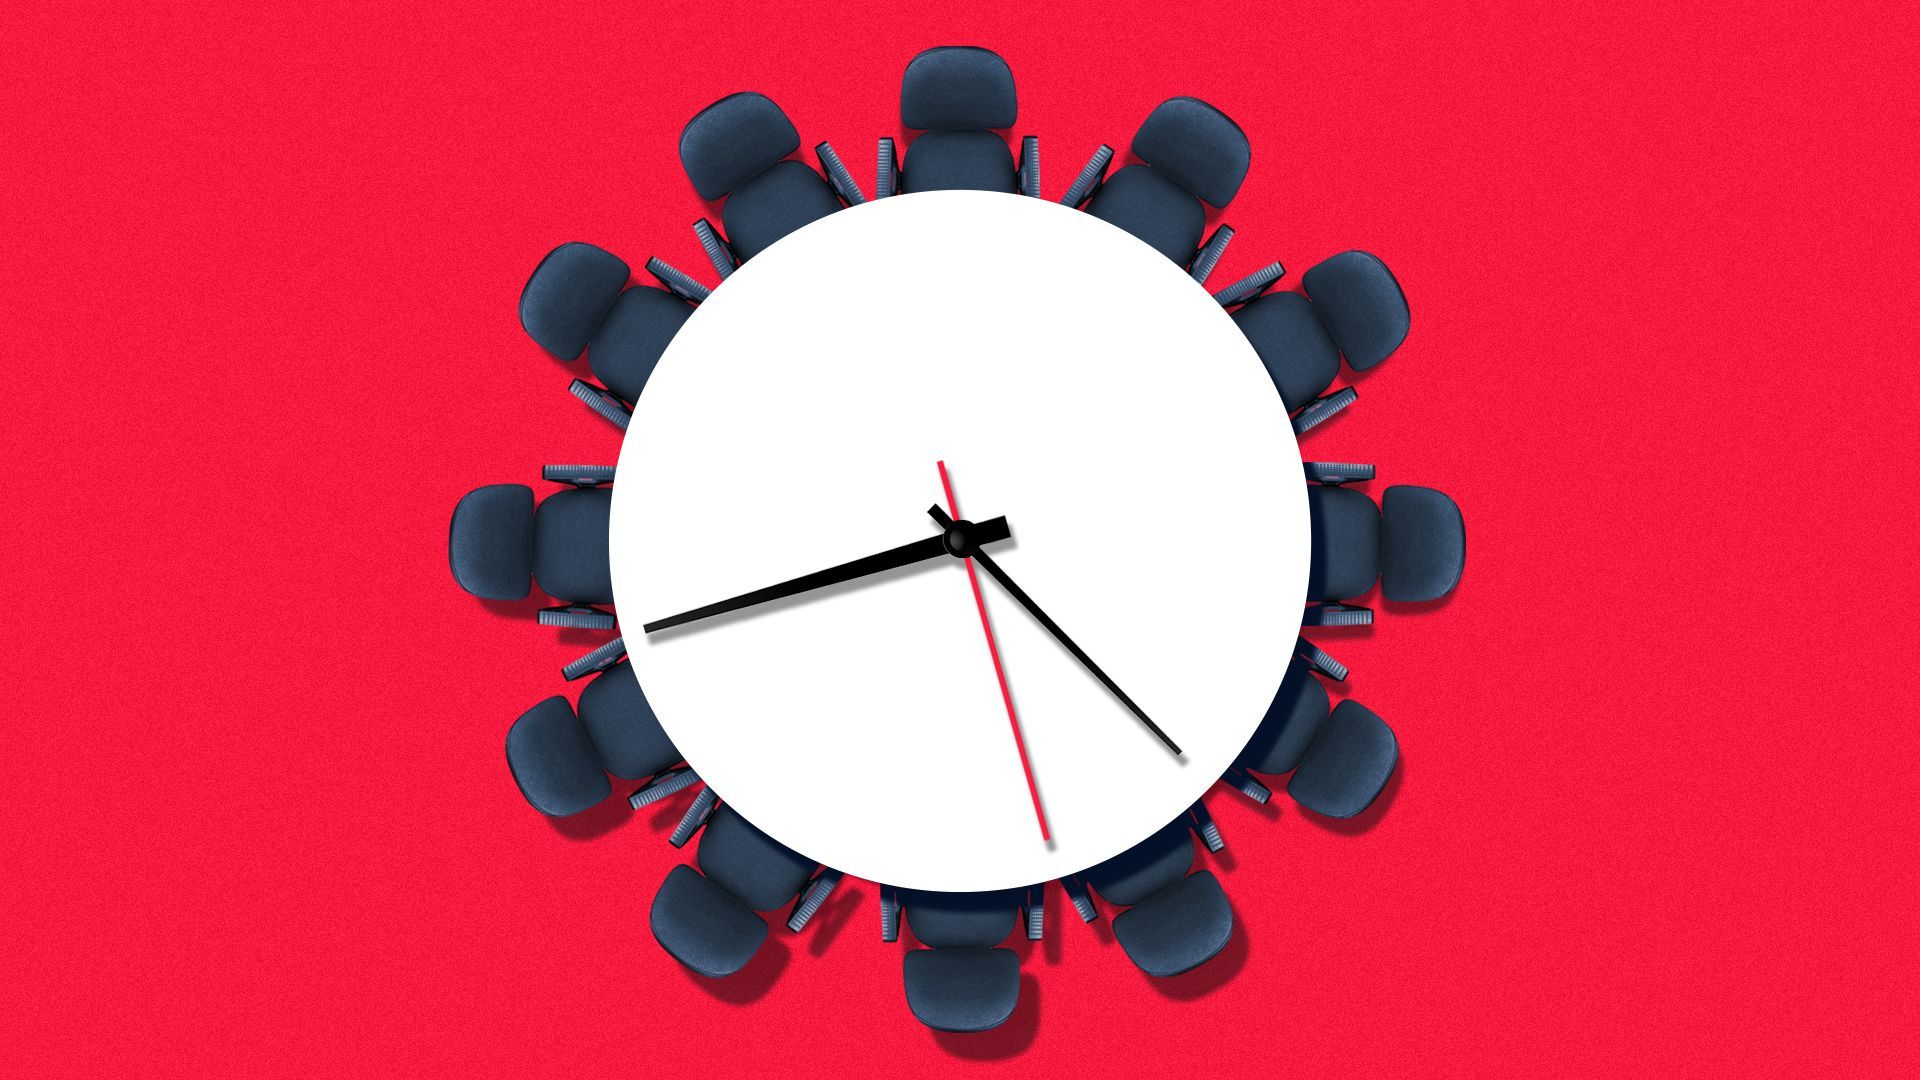 Illustration of a conference table surrounded by empty chairs with clock hands in the center